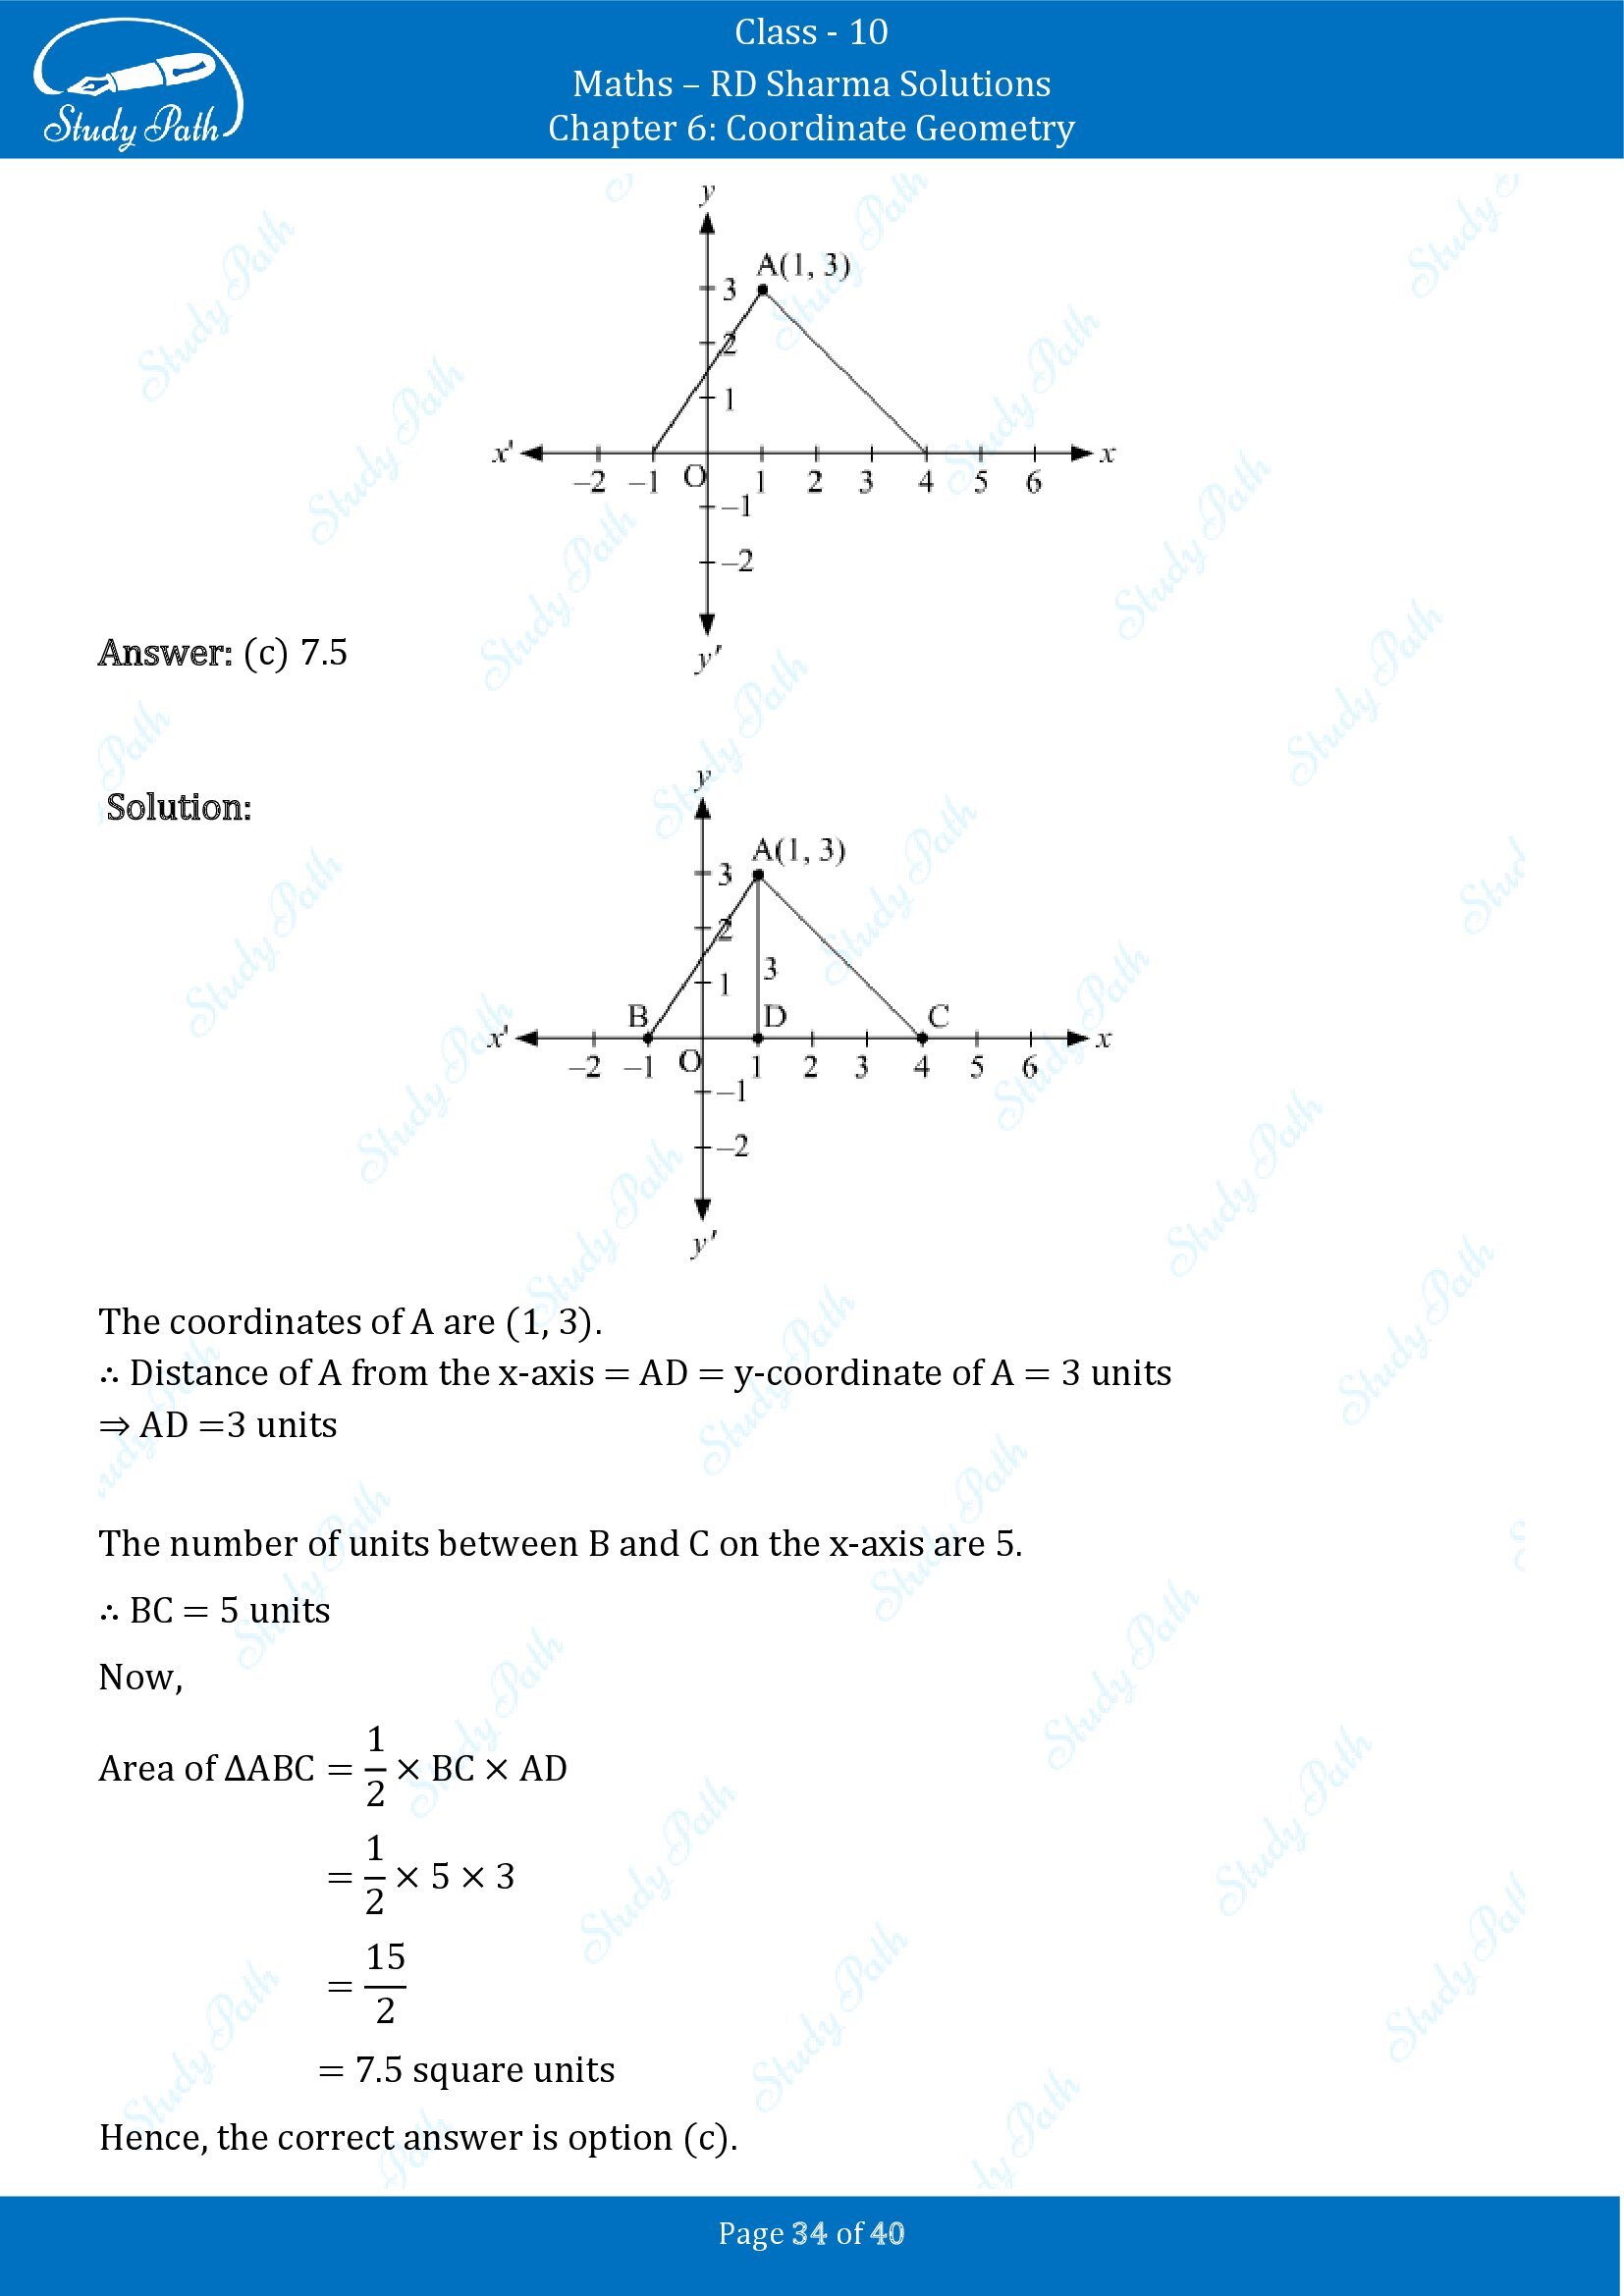 RD Sharma Solutions Class 10 Chapter 6 Coordinate Geometry Multiple Choice Question MCQs 00034